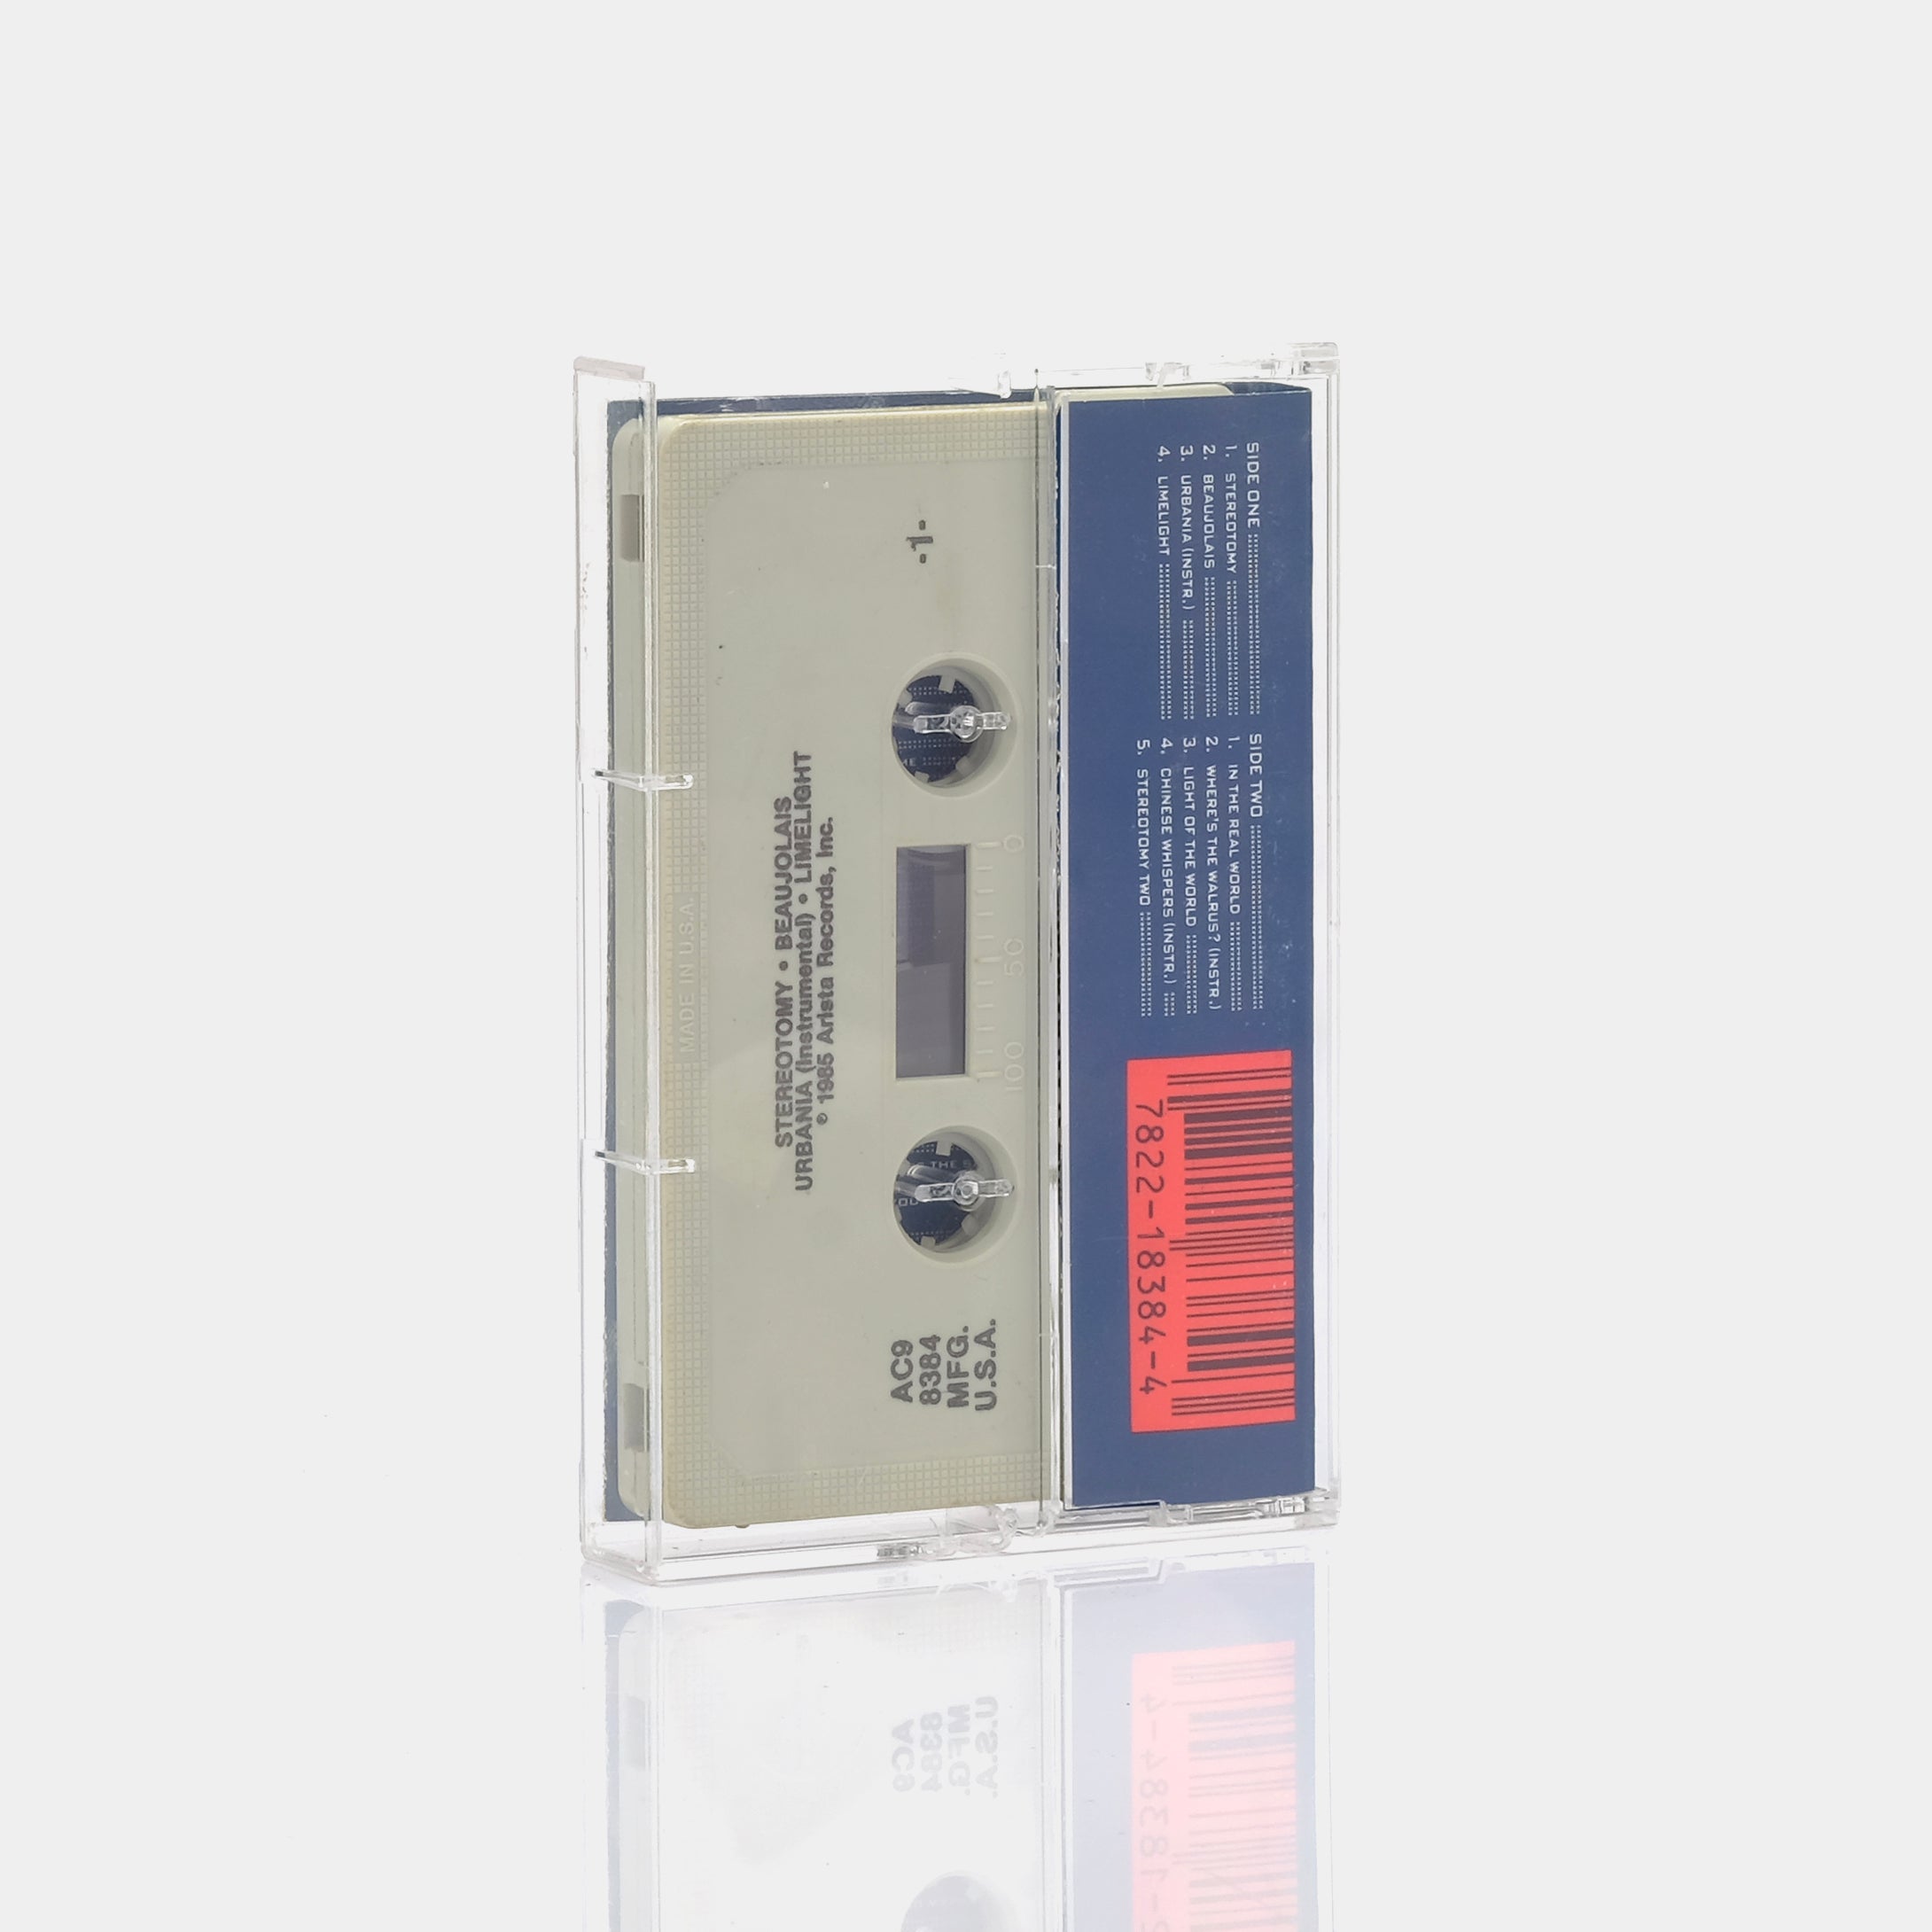 The Alan Parsons Project - Stereotomy Cassette Tape